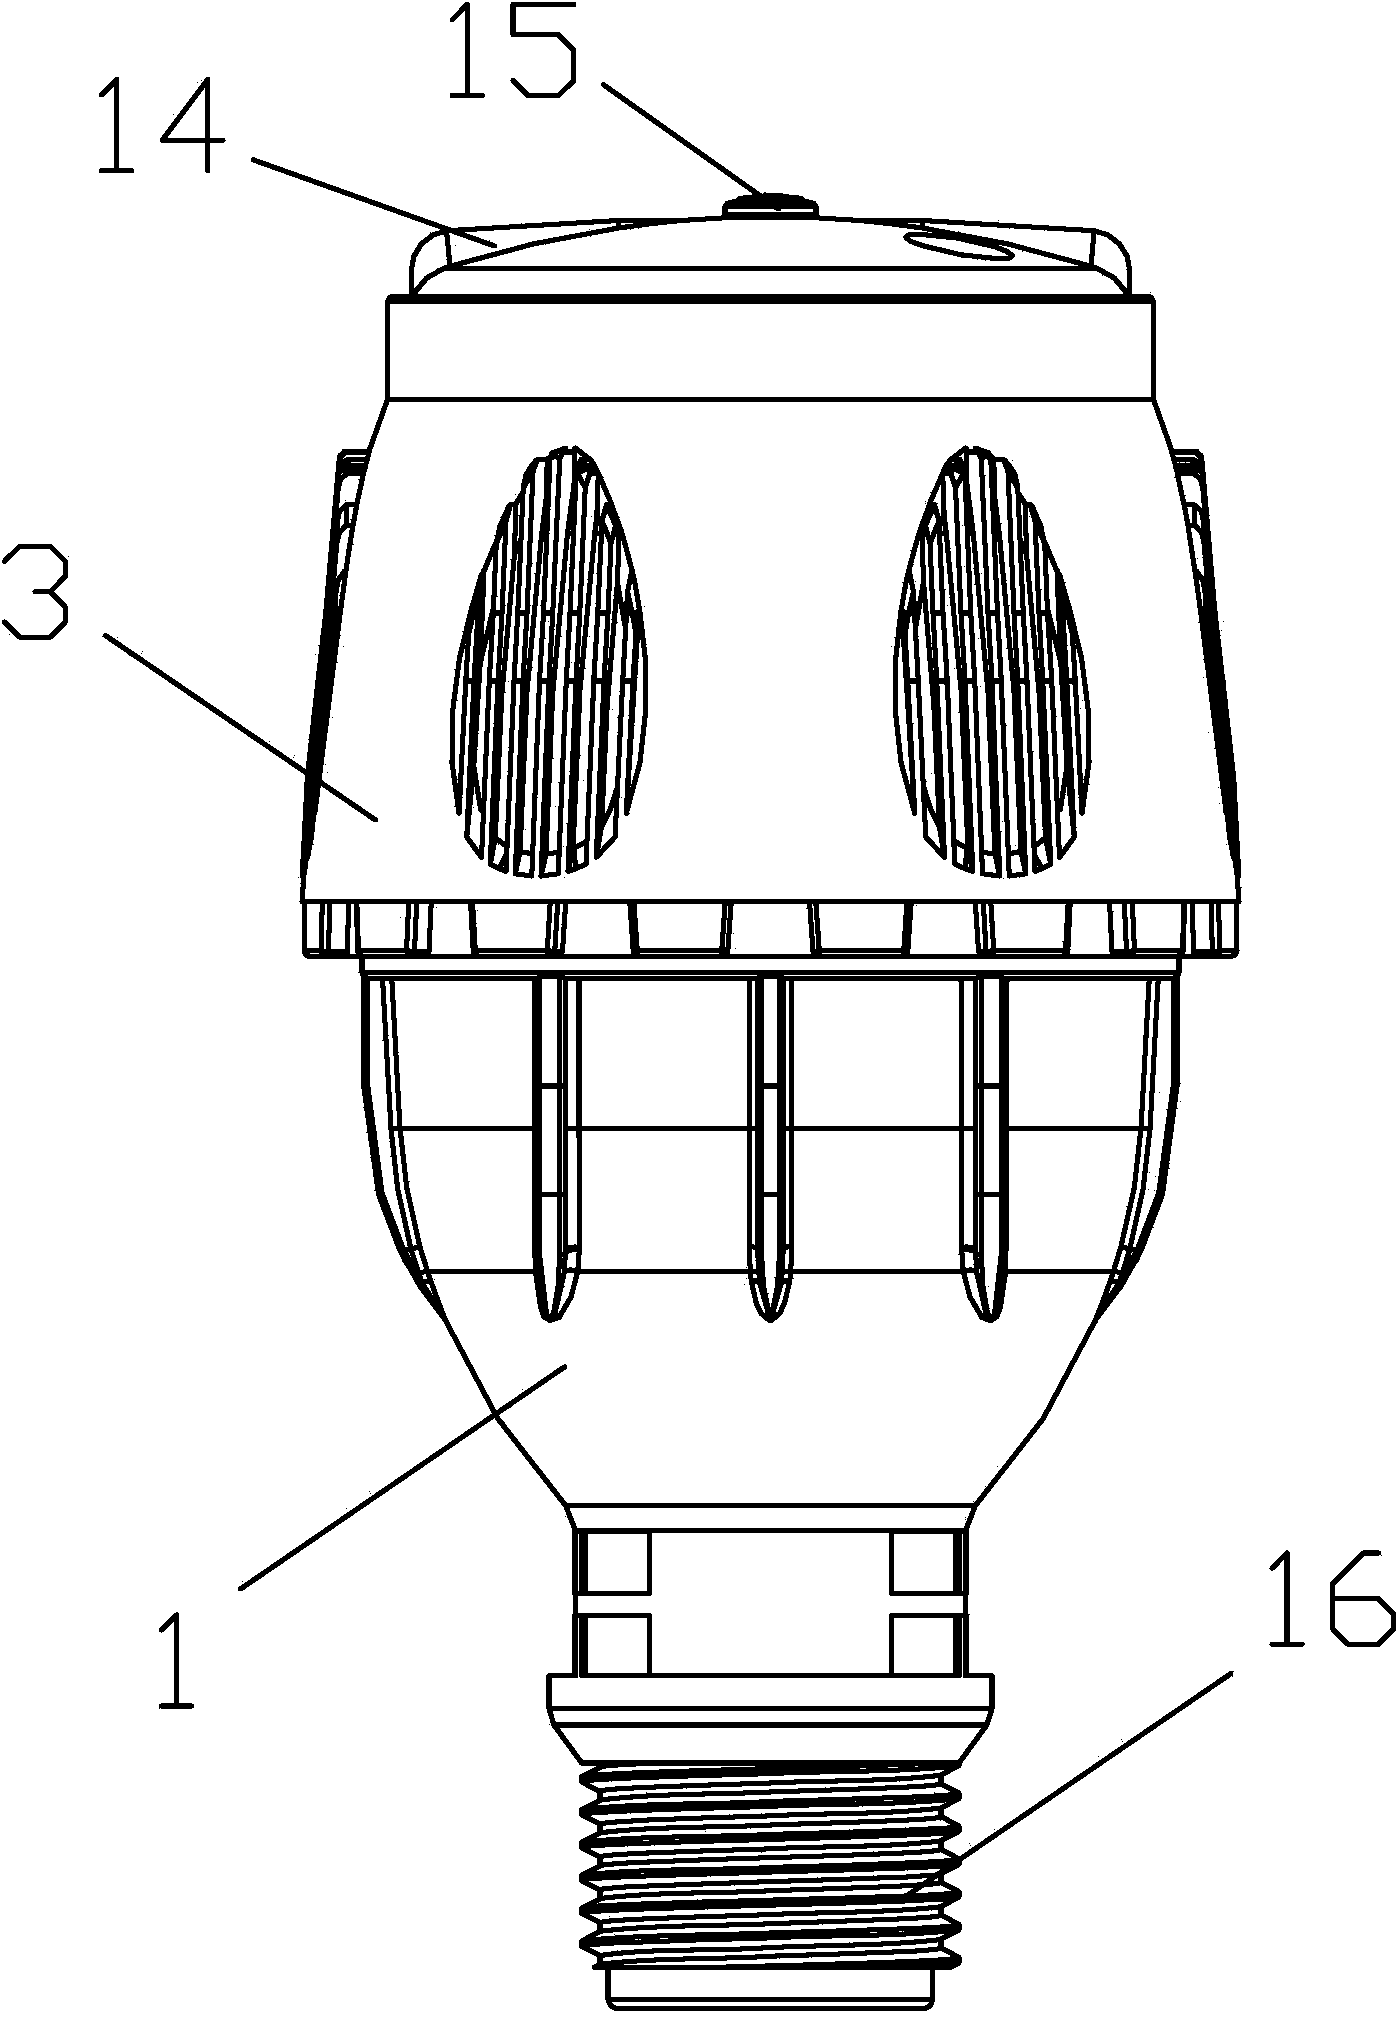 High-uniformity anti-blocking insect-preventing rotating nozzle